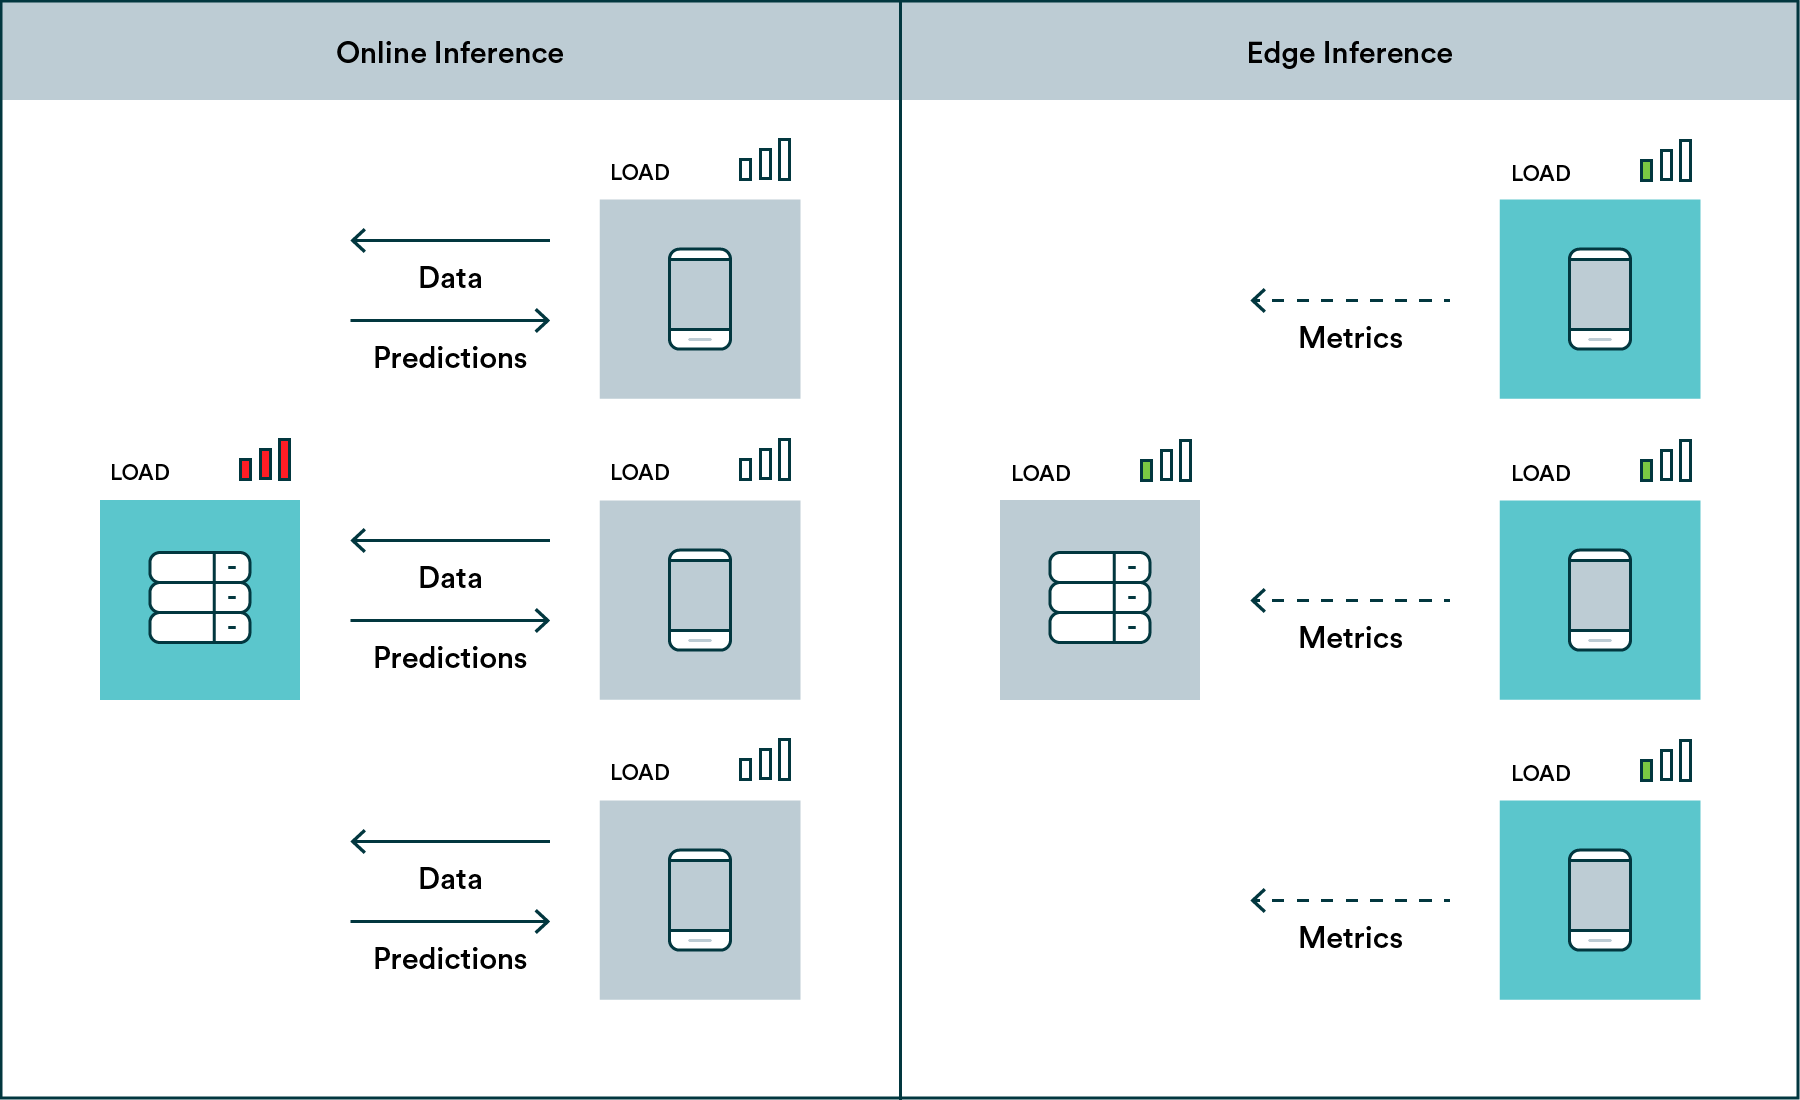 How online and edge inference differ